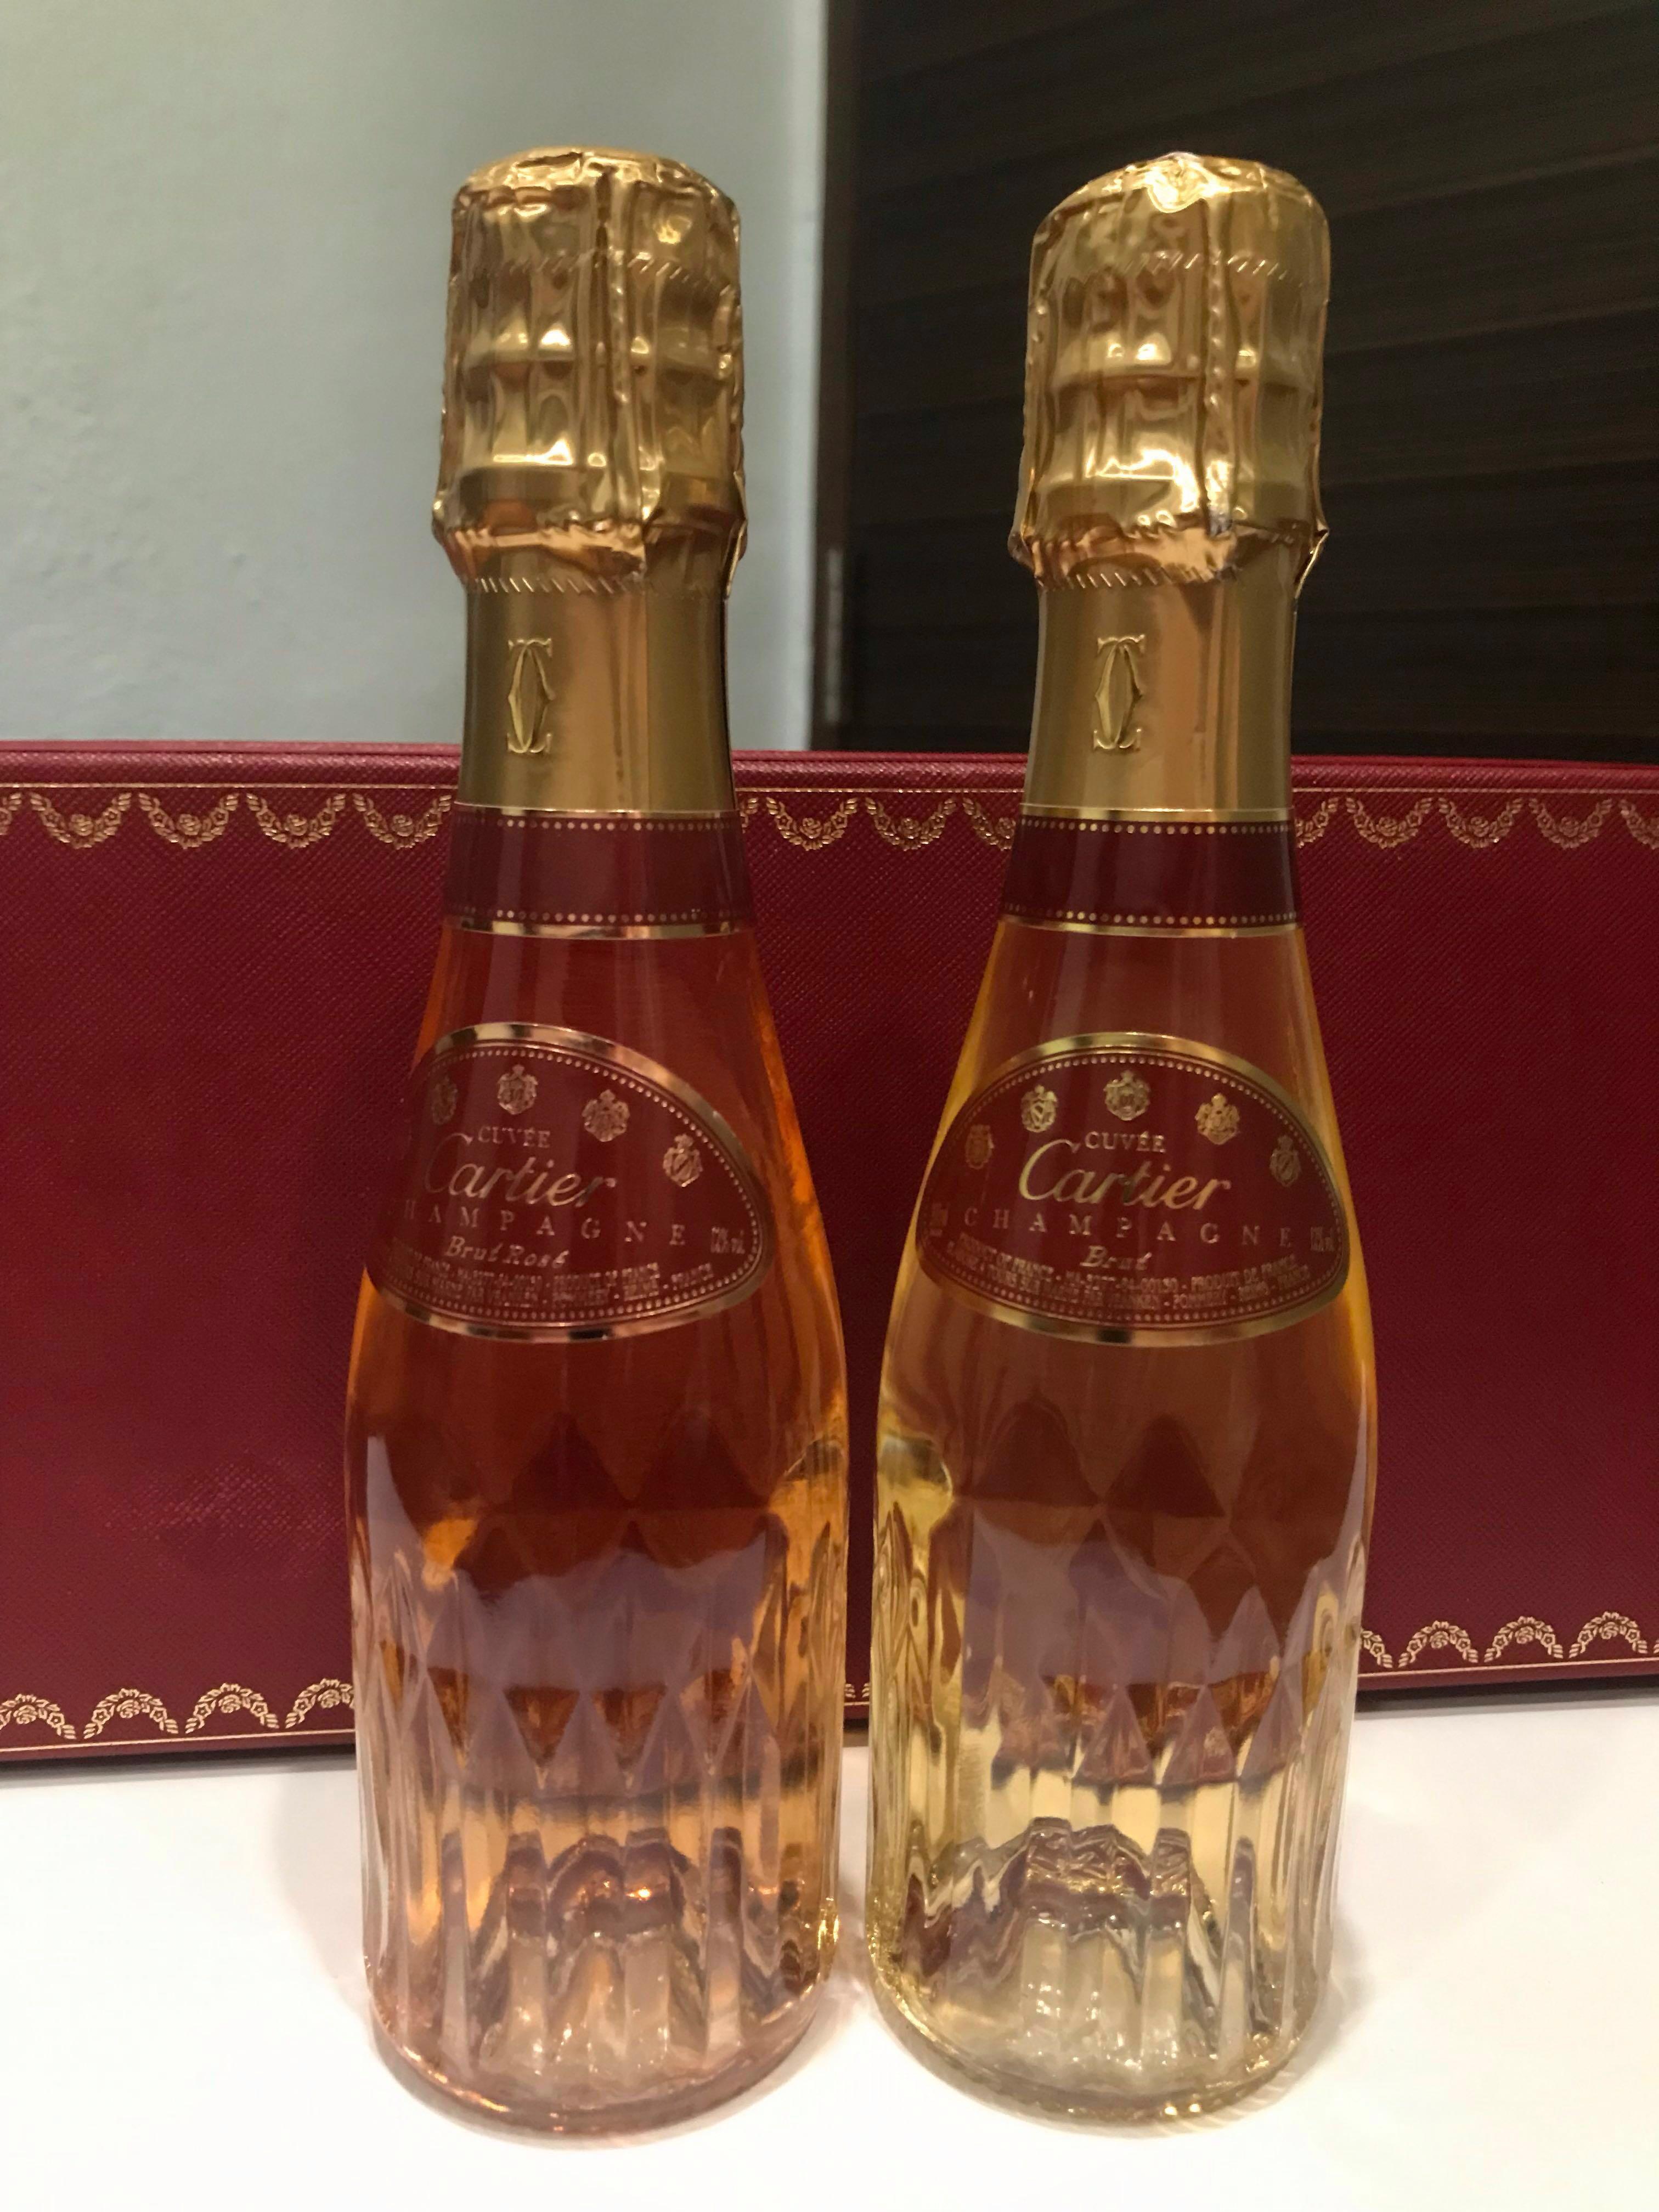 cartier champagne brut price